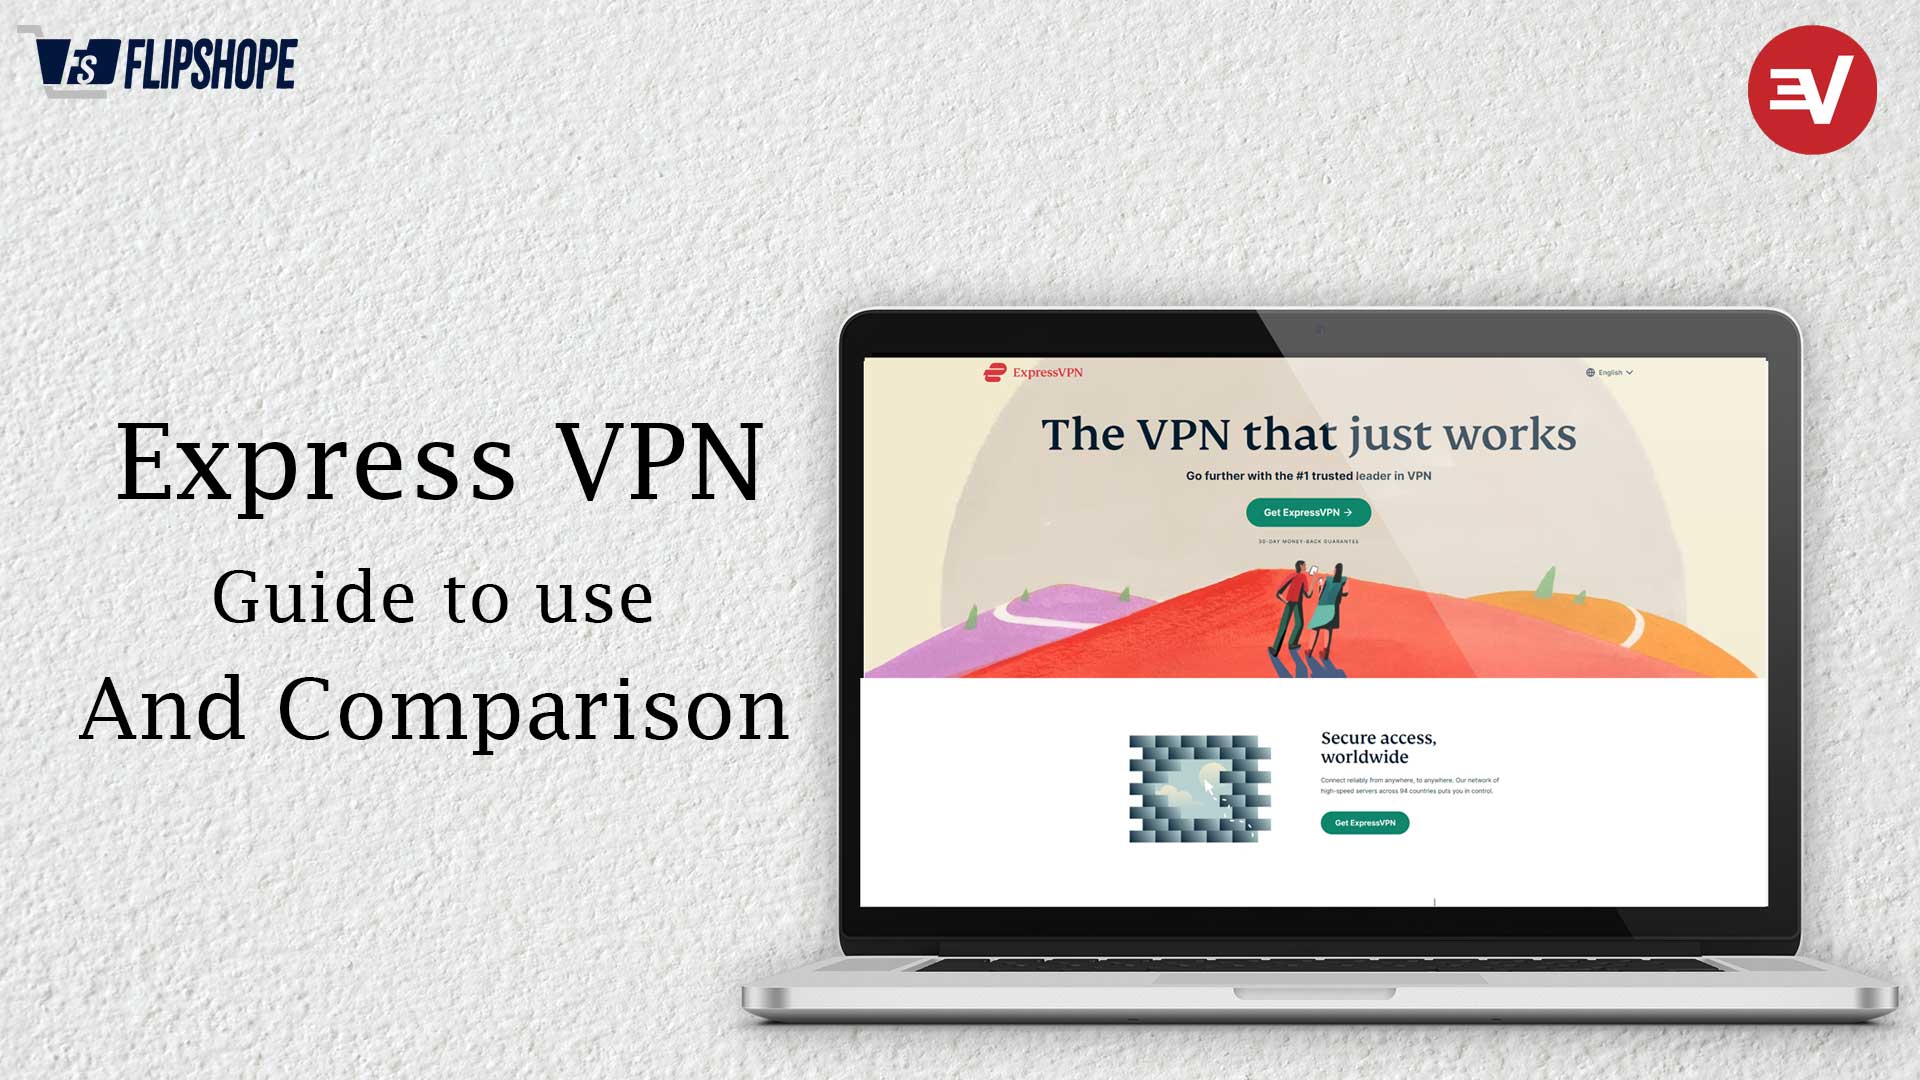 Guide to use express VPN and comparison